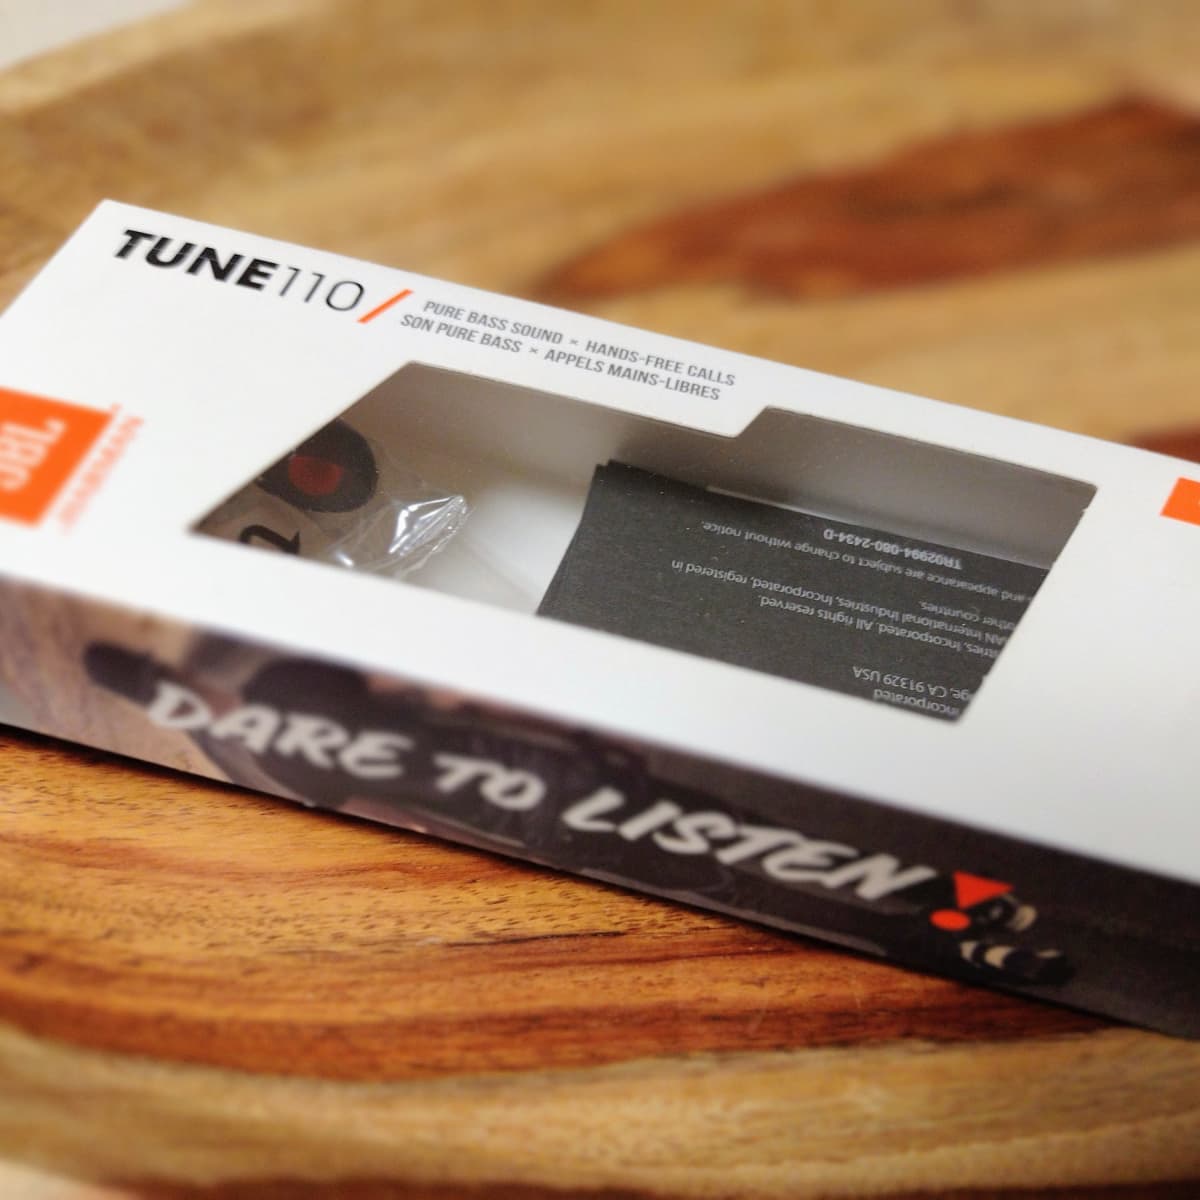 Seneste nyt moderat Fradrage JBL Tune 110 Wired in Ear Headphones Review and Opinion - HubPages